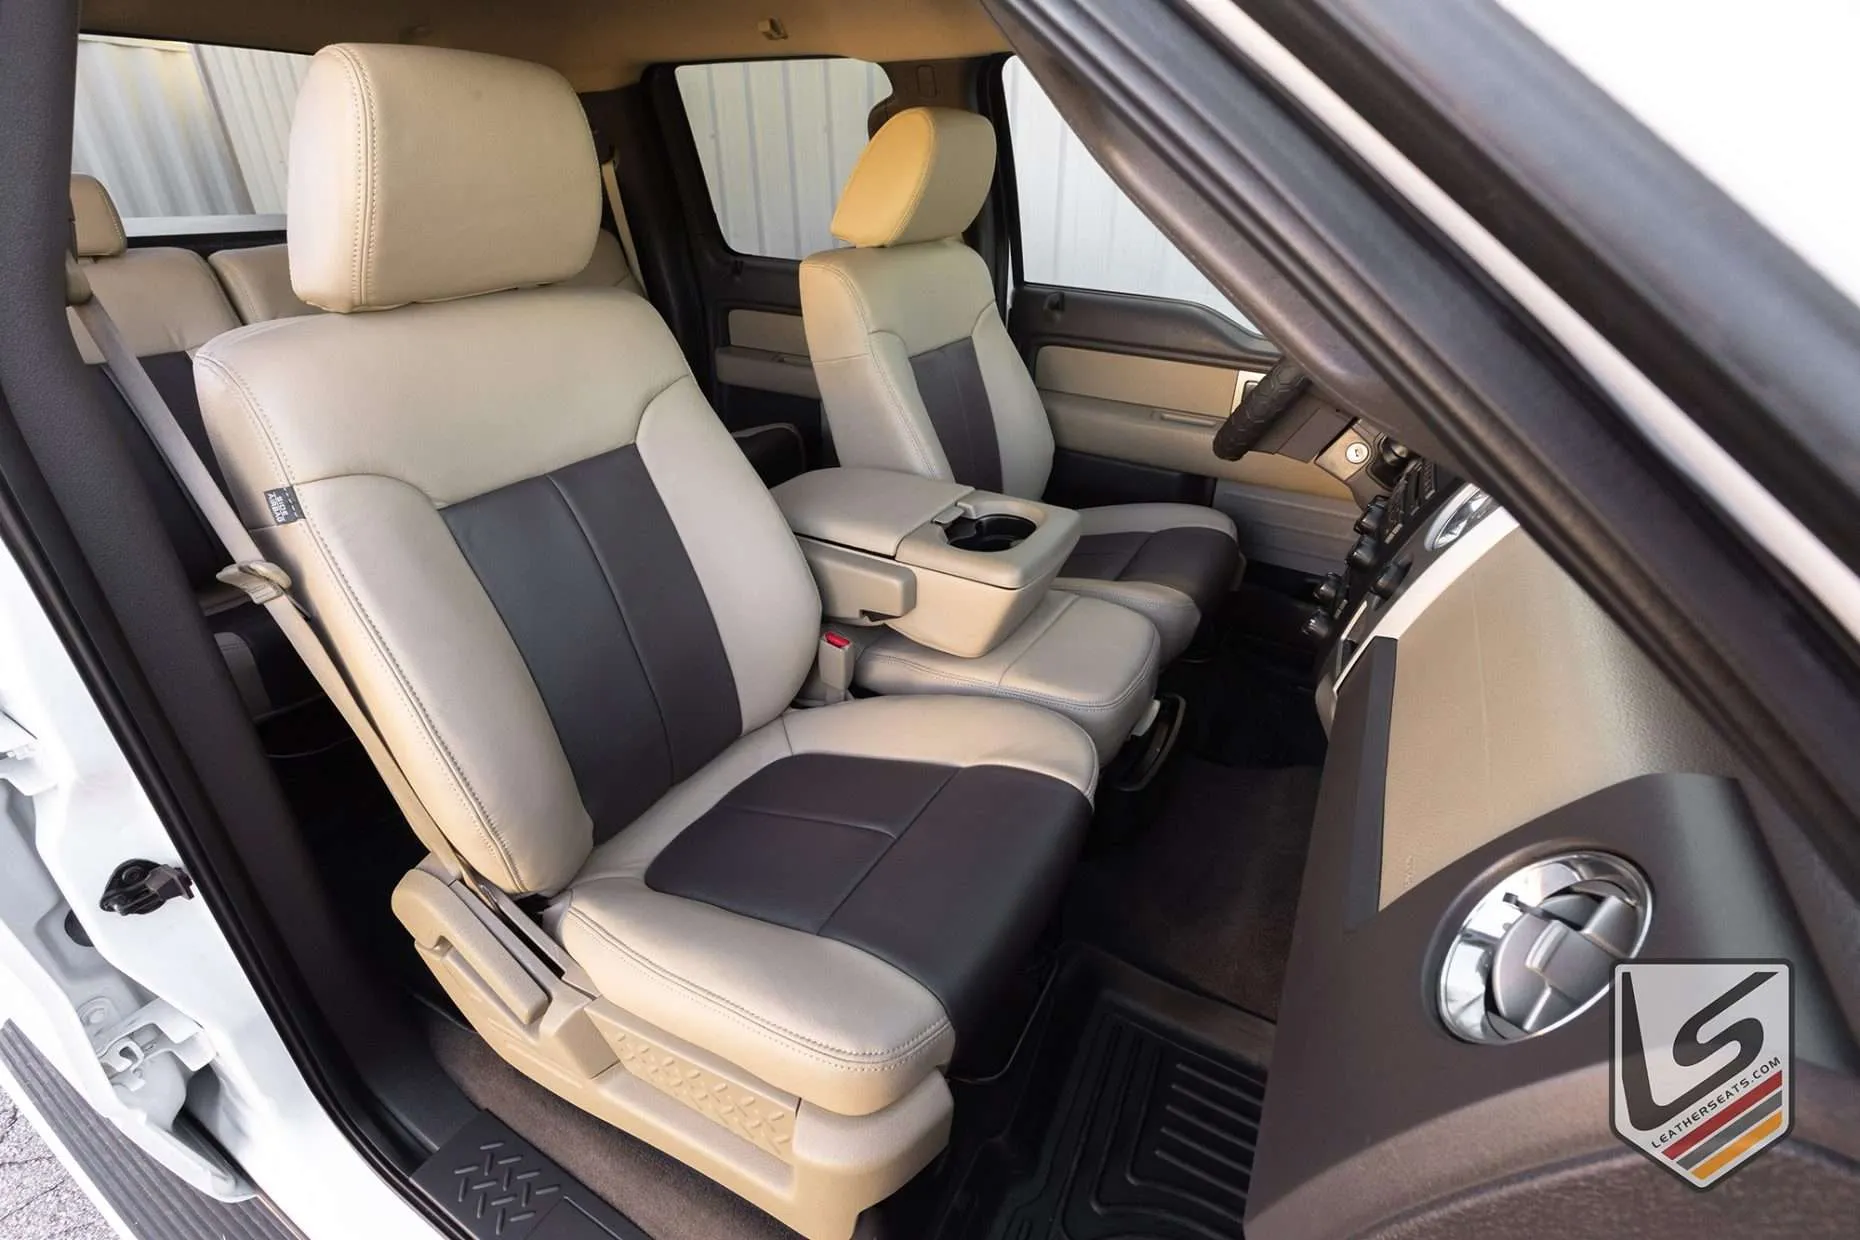 Ford F-150 XLT with LeatherSeats.com upholstery - Sandstone and Java - Front passenger seat